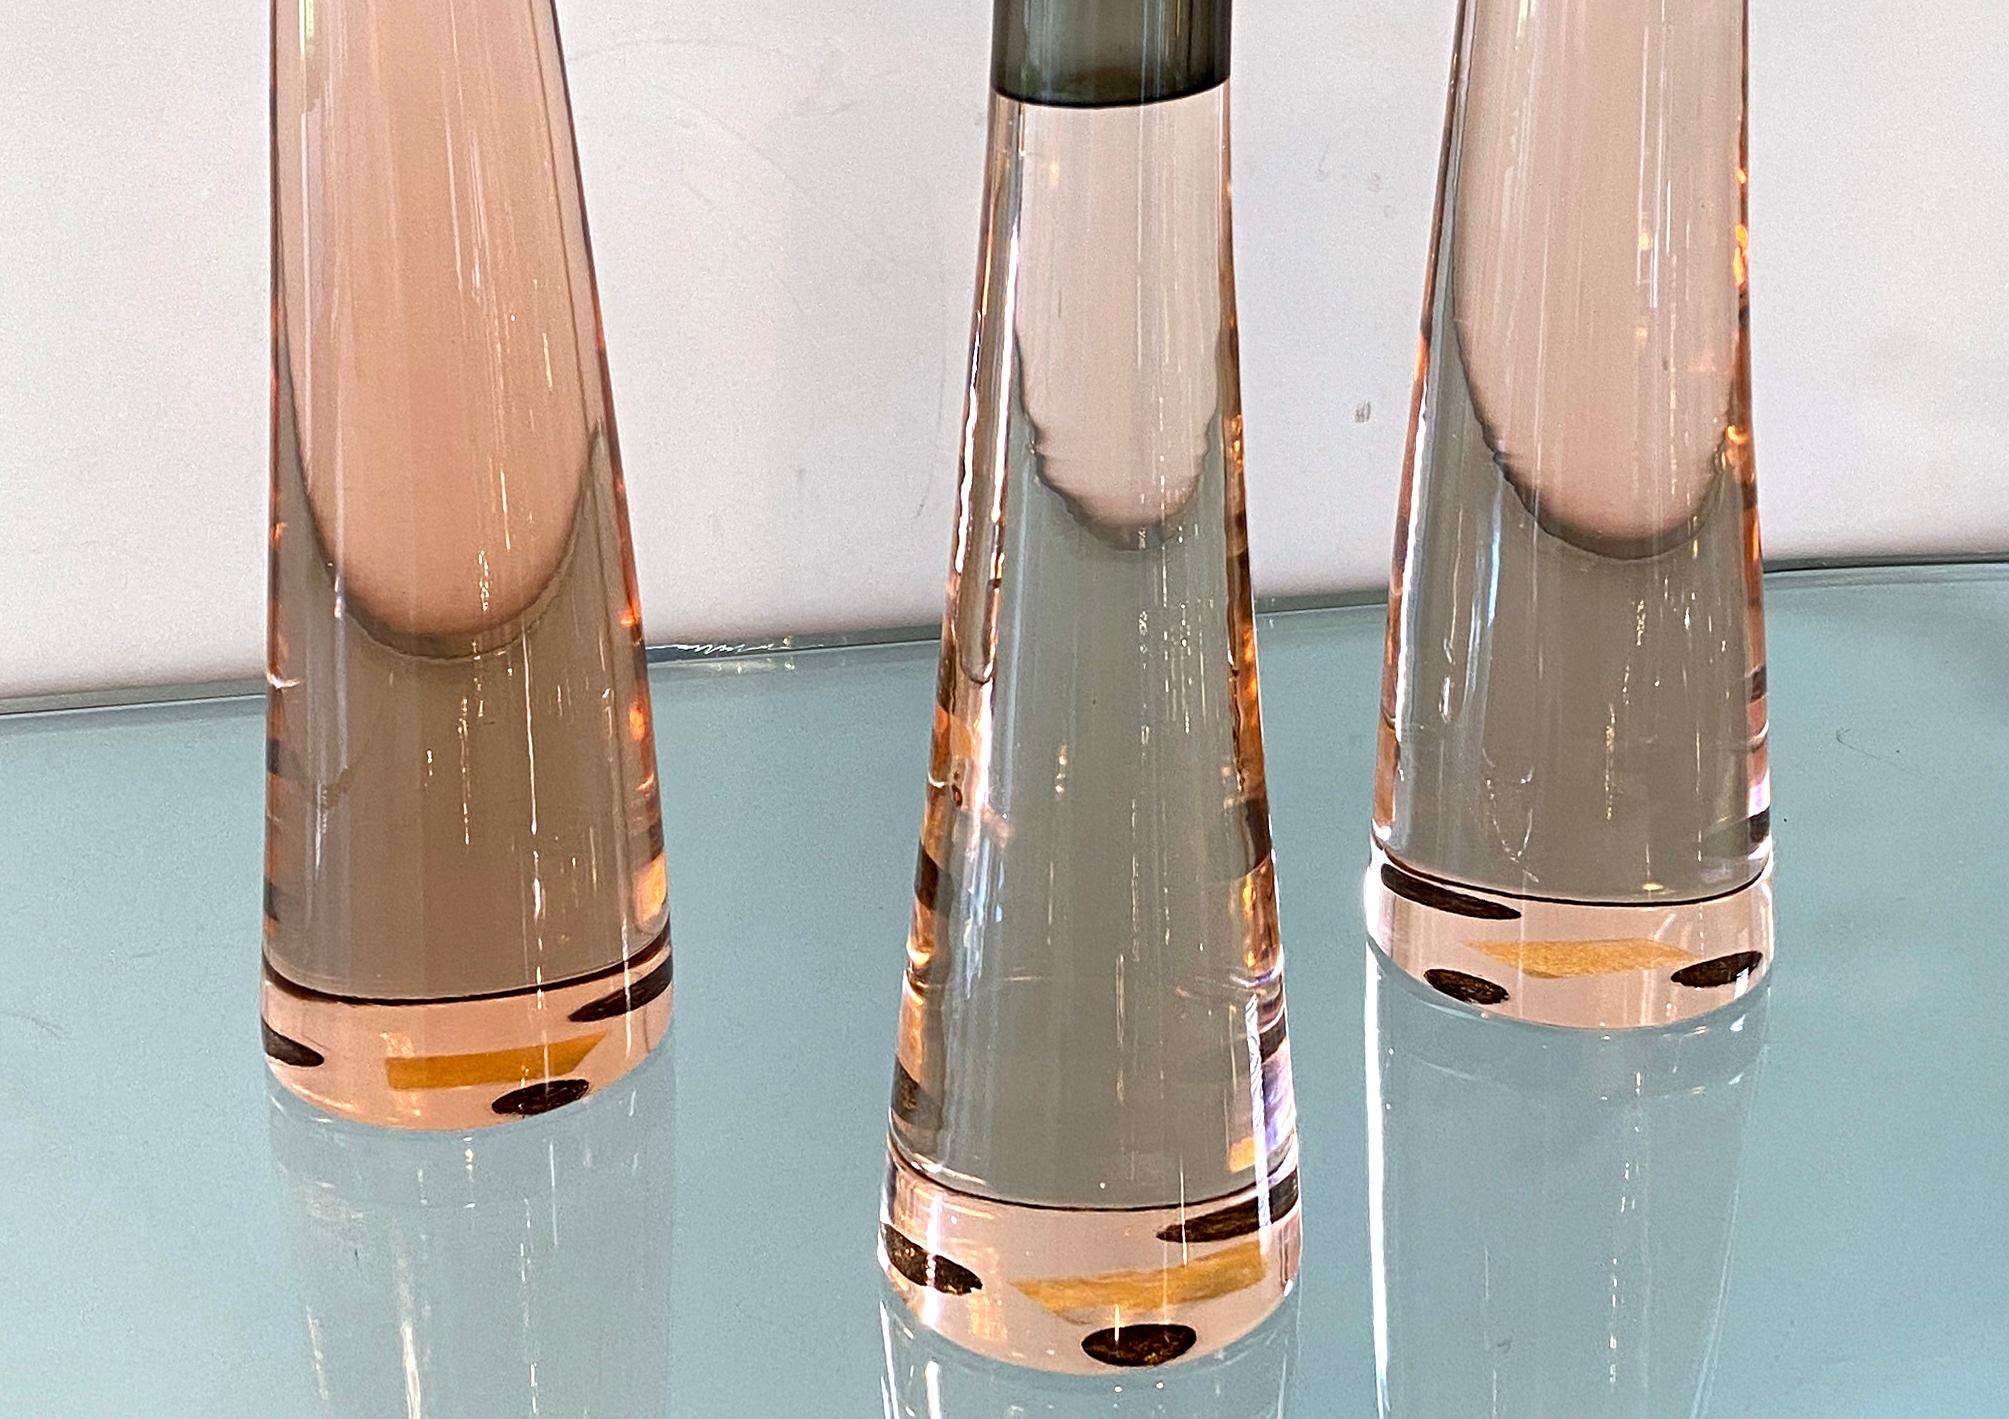 Set of 3 Antonio Da Ros for Cenedese pink and smoked glass candleholders.